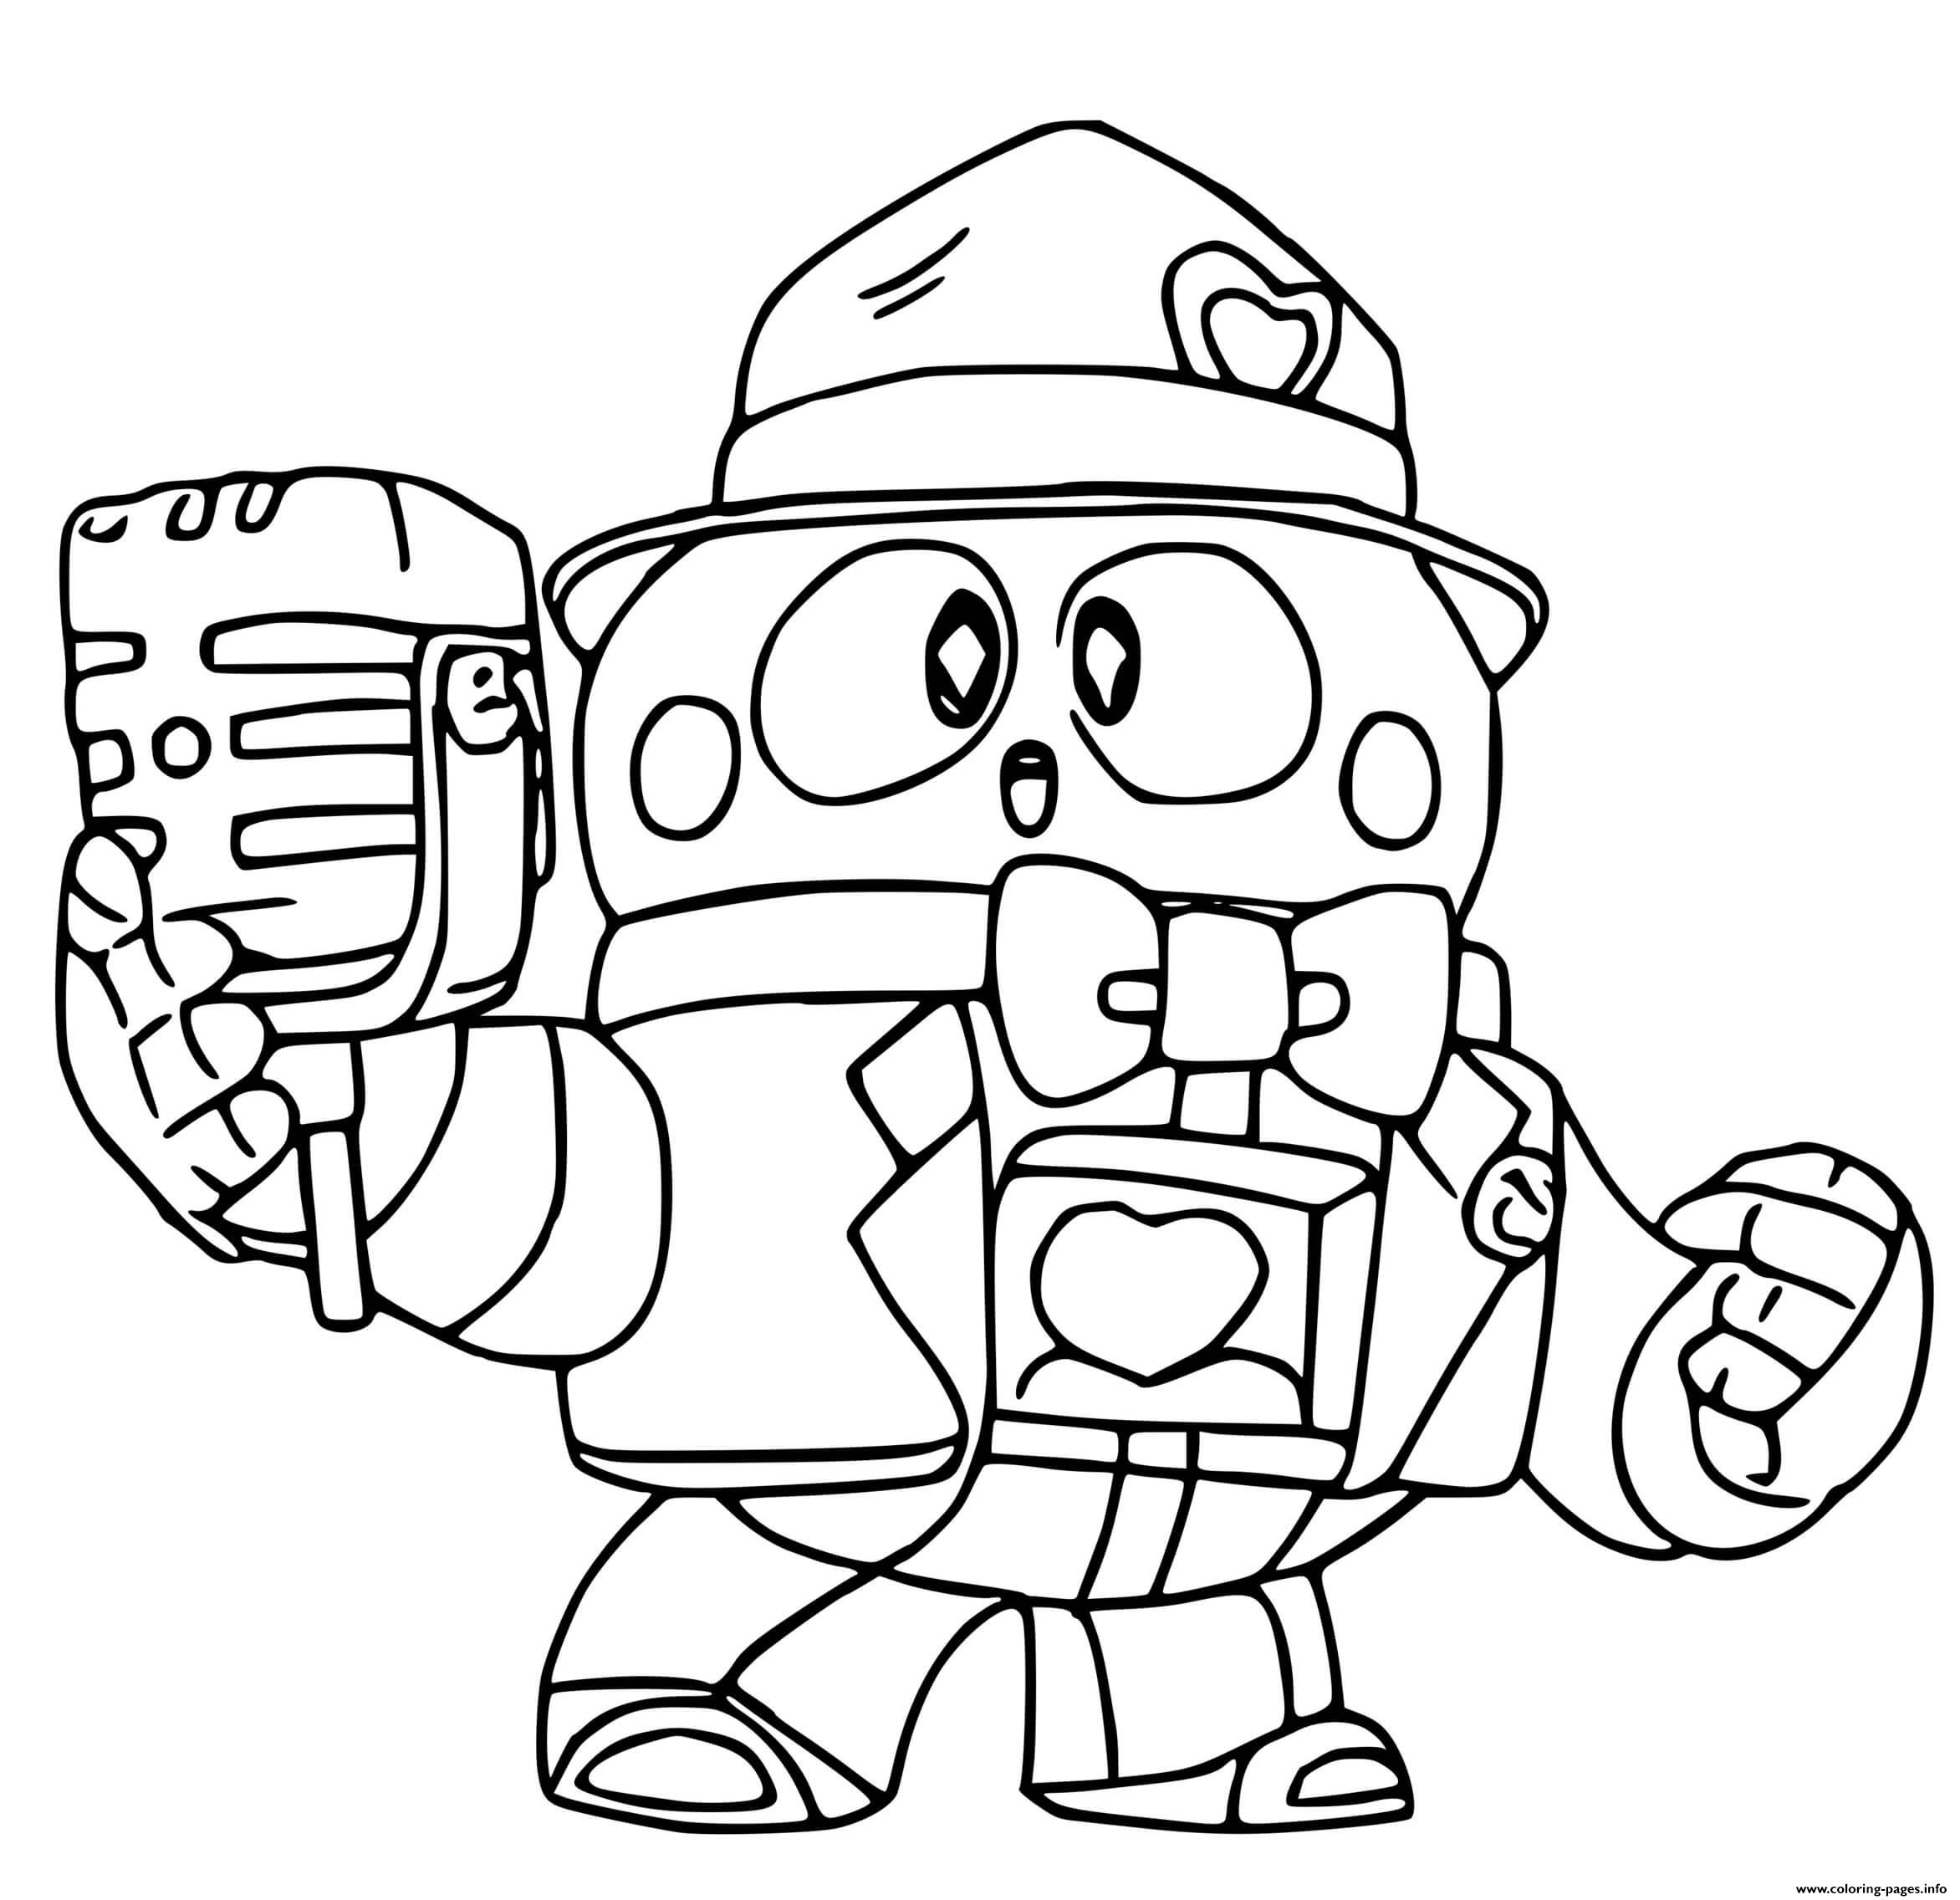 Brawl Stars Force Starr Lou Le Doux Coloring Pages Printable - coloriage personage brawl stars